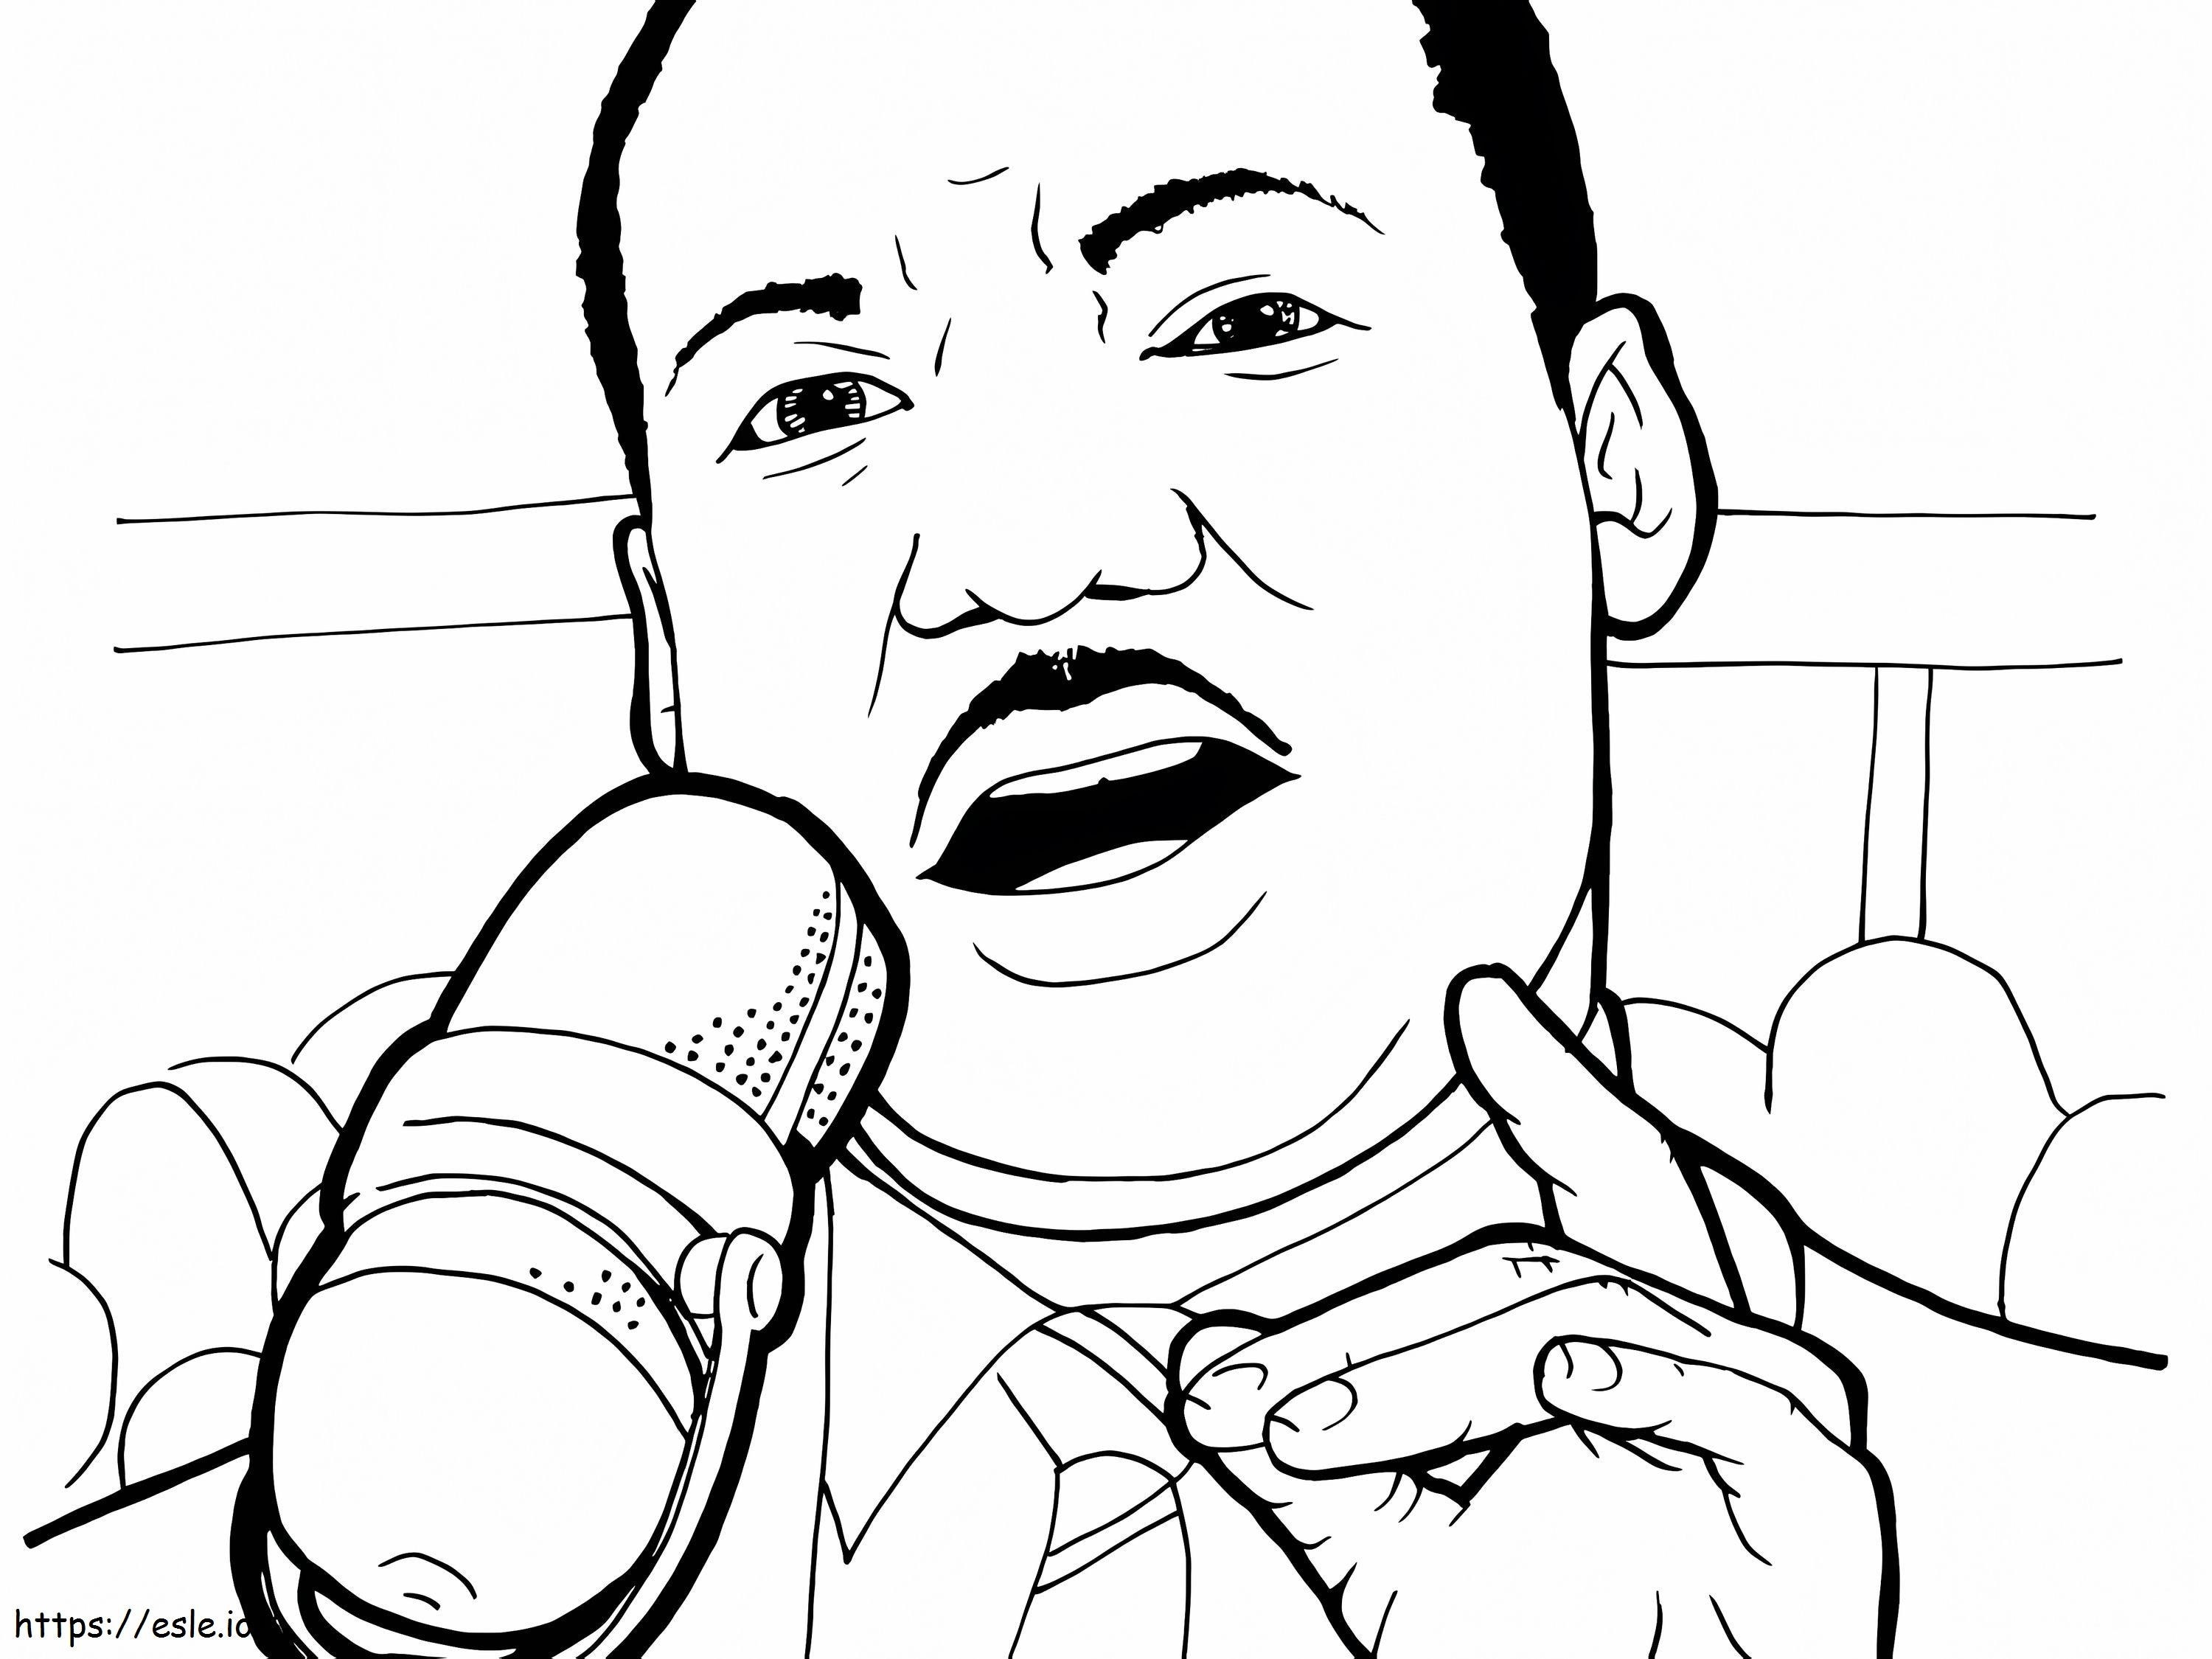 Martin Luther King Jr 10 coloring page